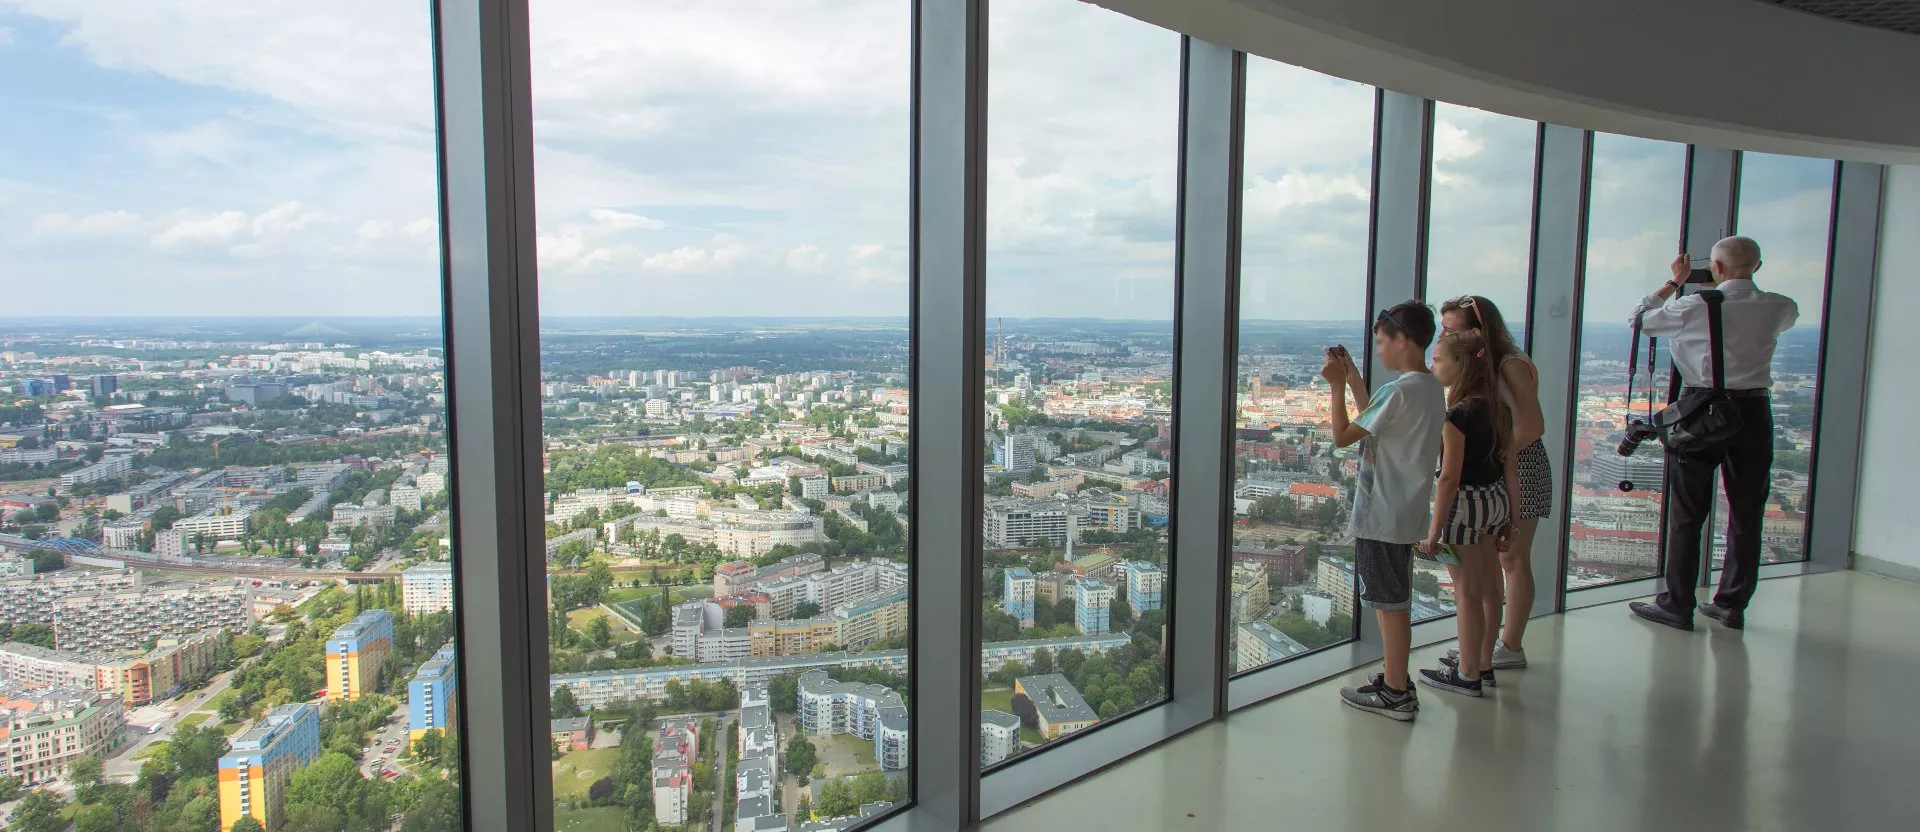 Taras Widokowy Sky Tower in Poland, Europe | Observation Decks - Rated 3.7